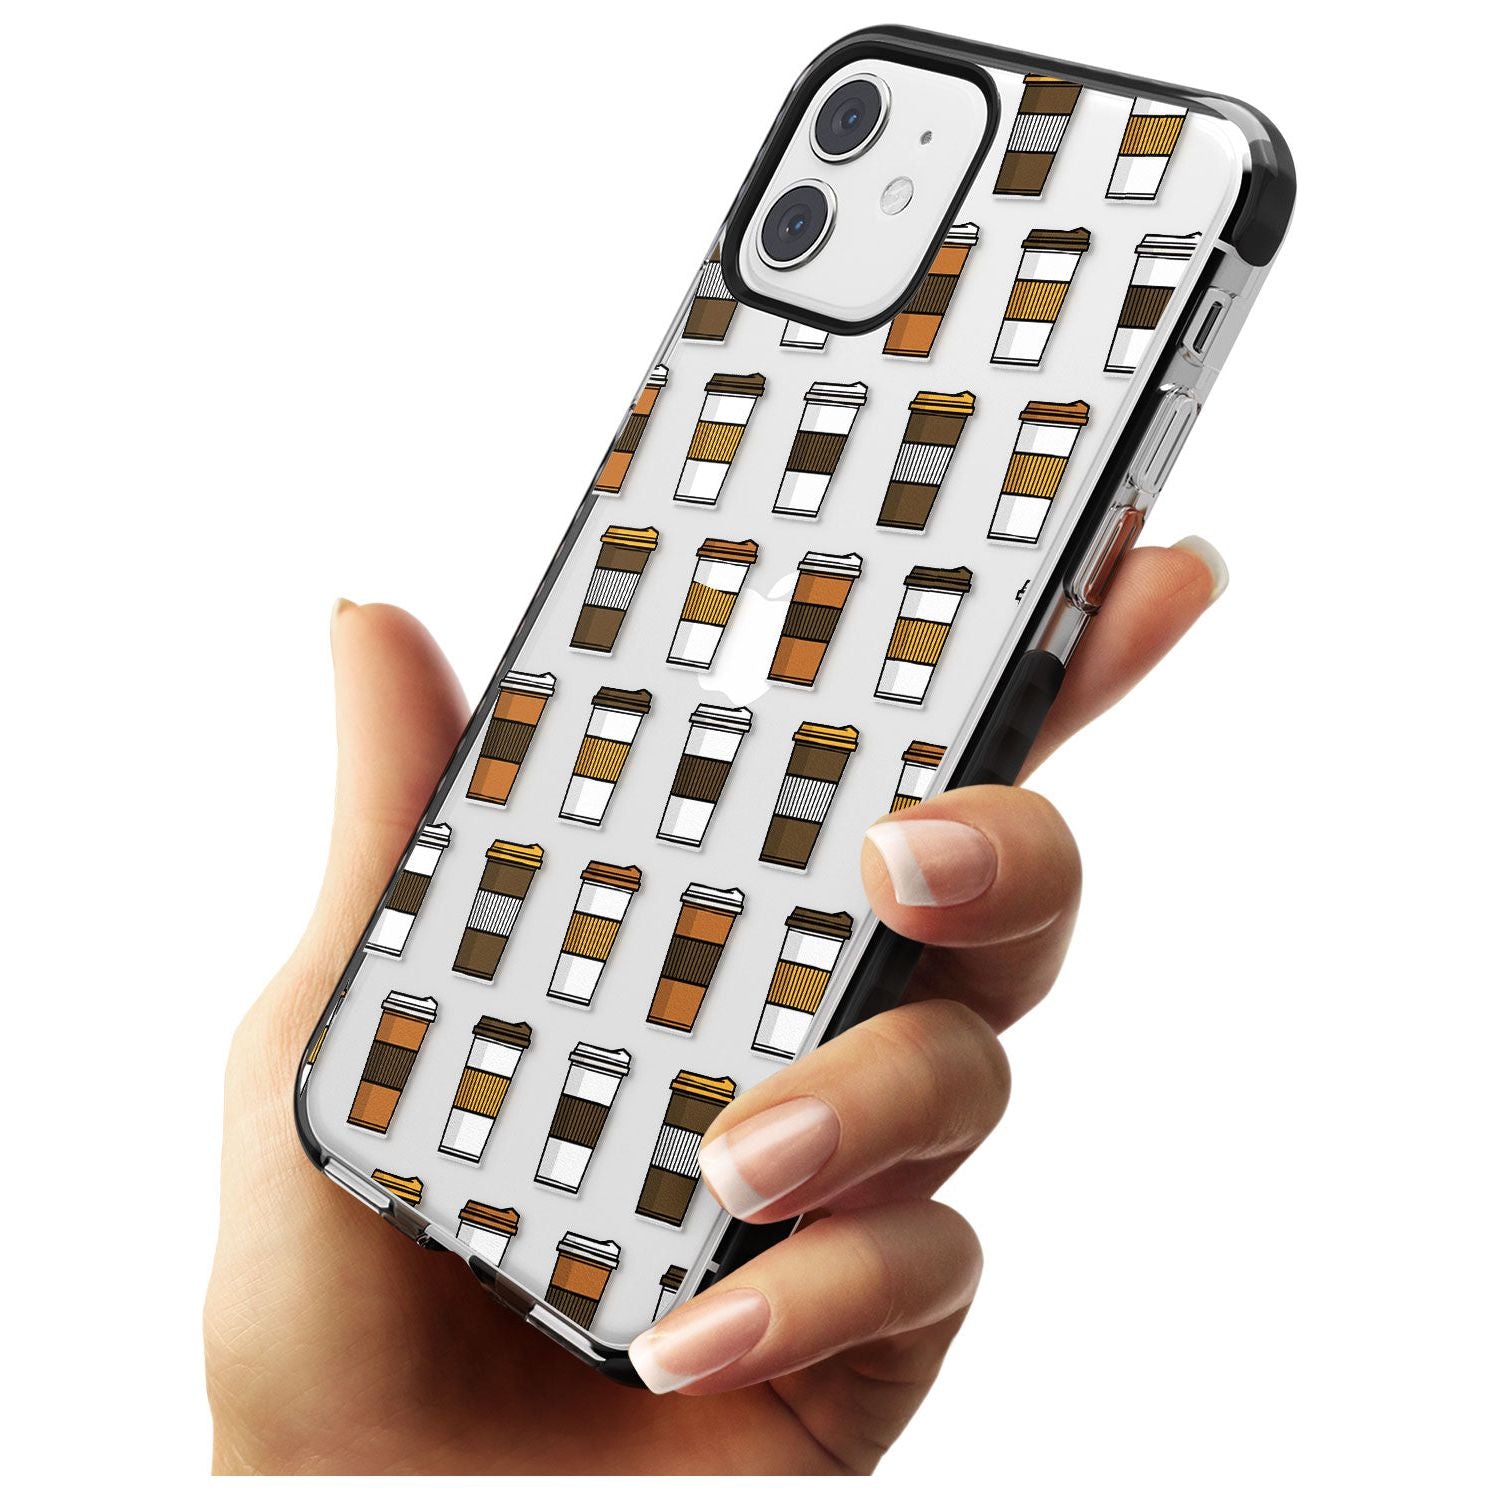 Coffee Cup Pattern Black Impact Phone Case for iPhone 11 Pro Max